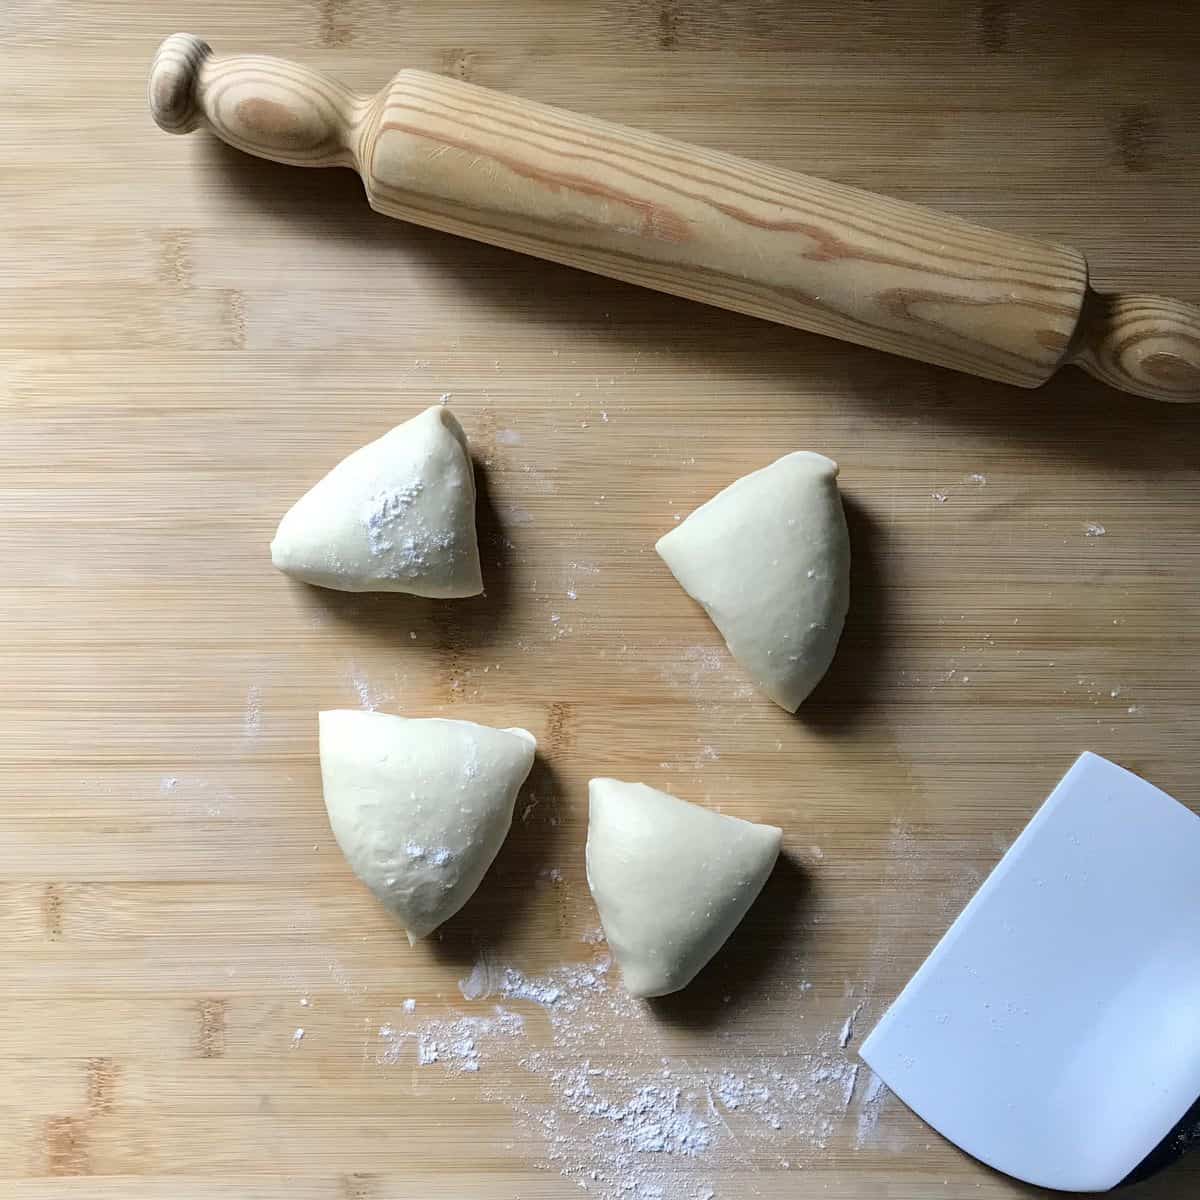 A ball of dough separated into 4 pieces next to a rolling pin.